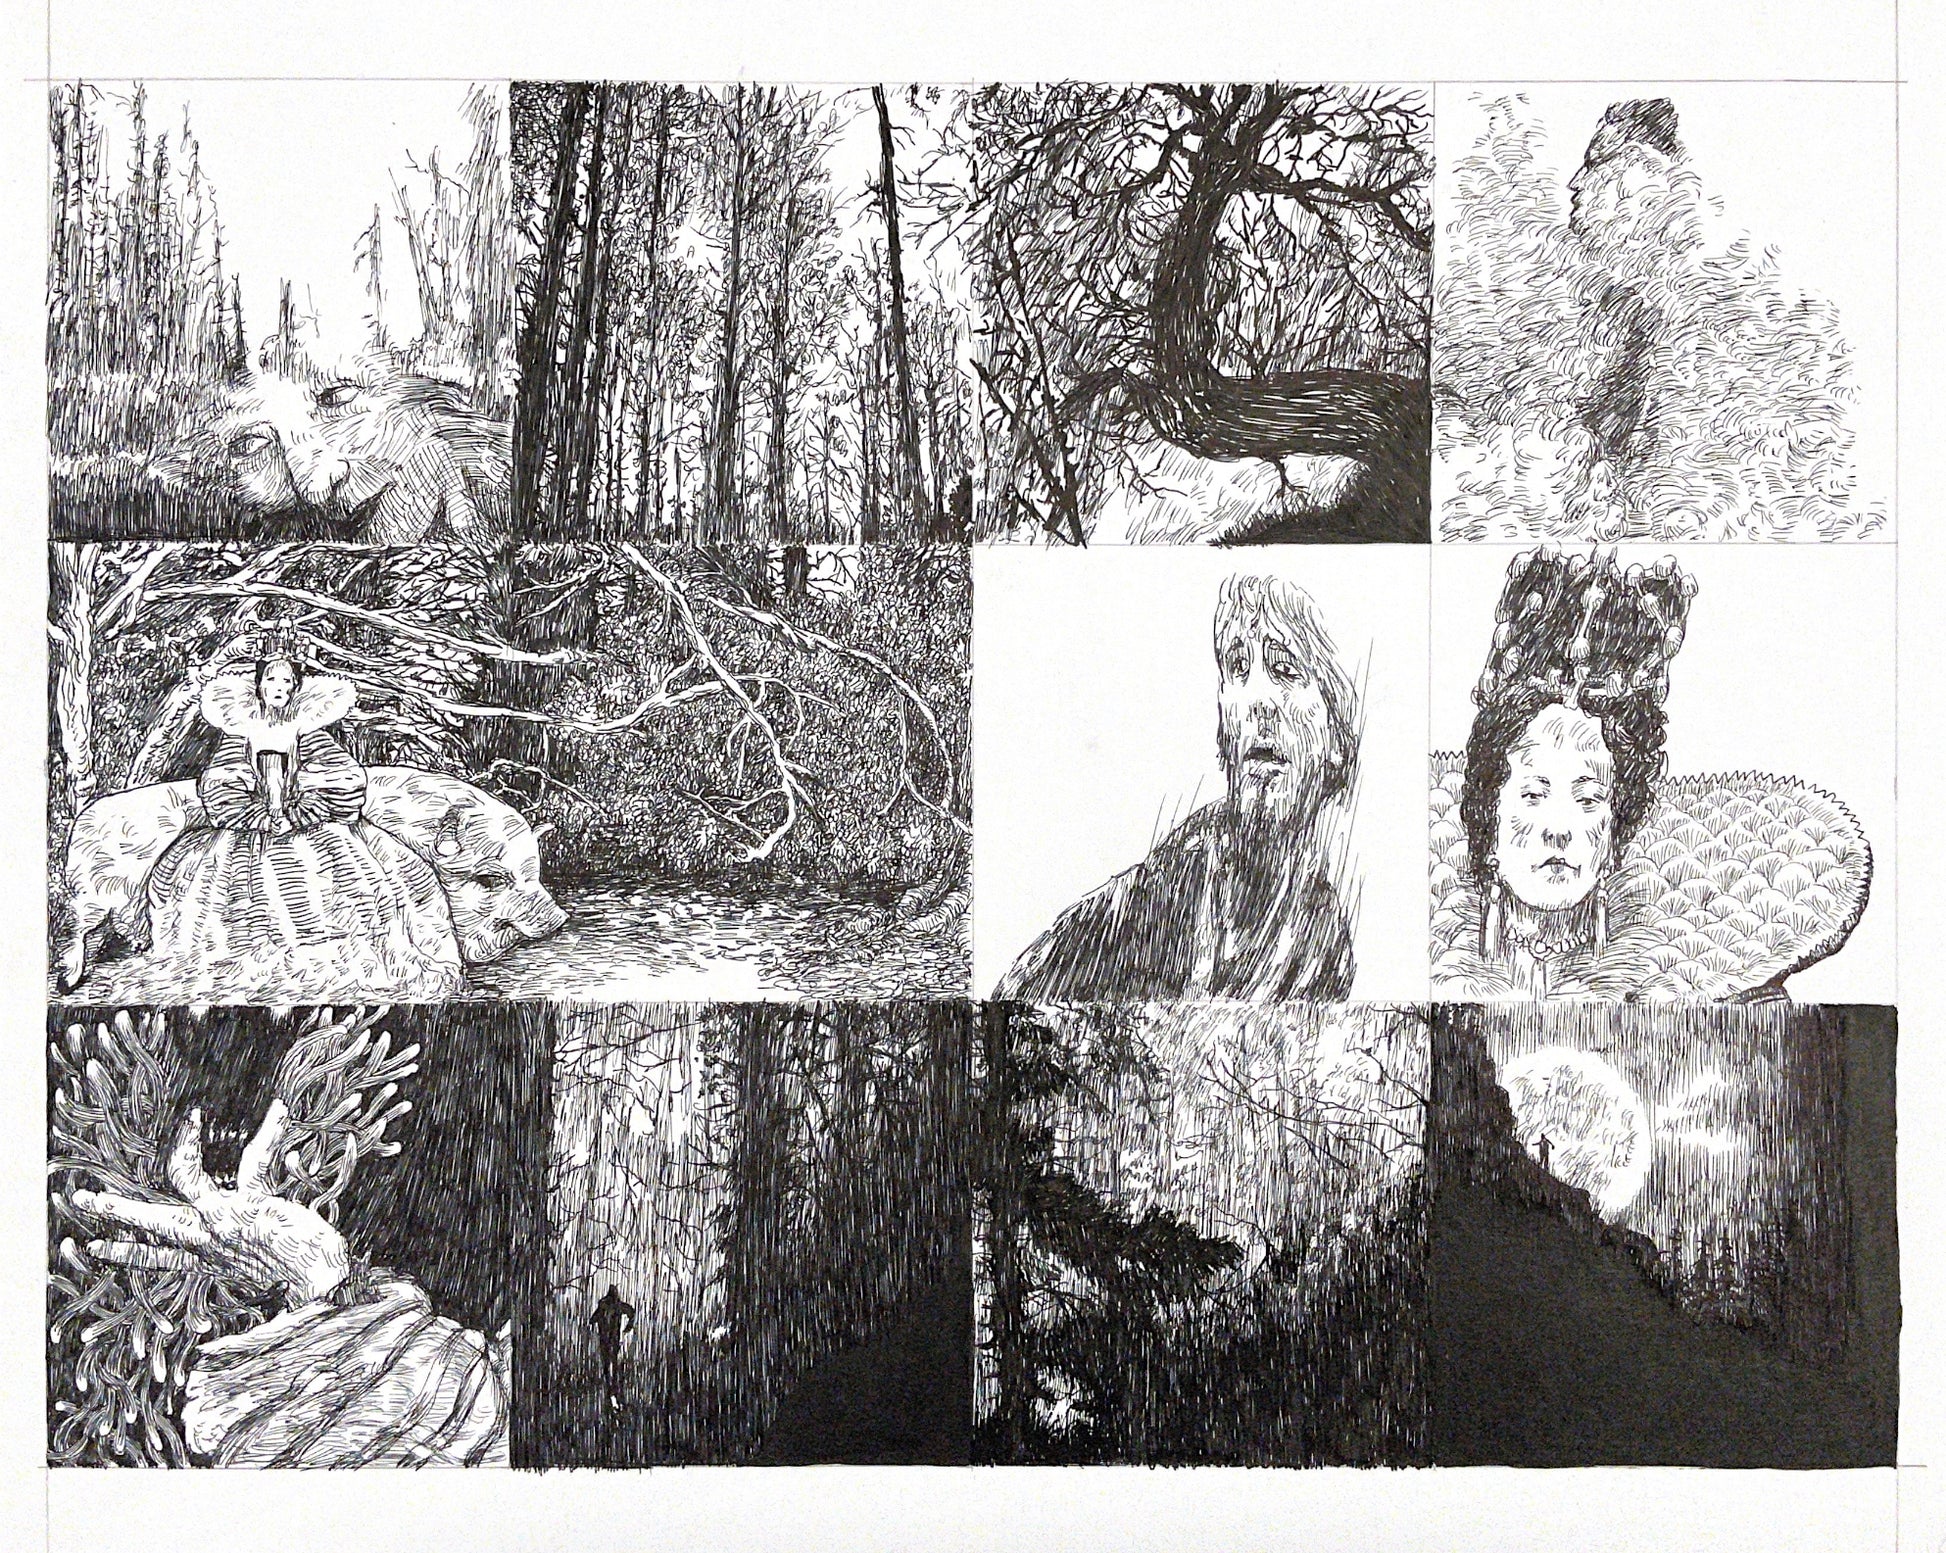 Graphic novel panels, featuring ink drawings, people, woods and movement and mystical imagery..